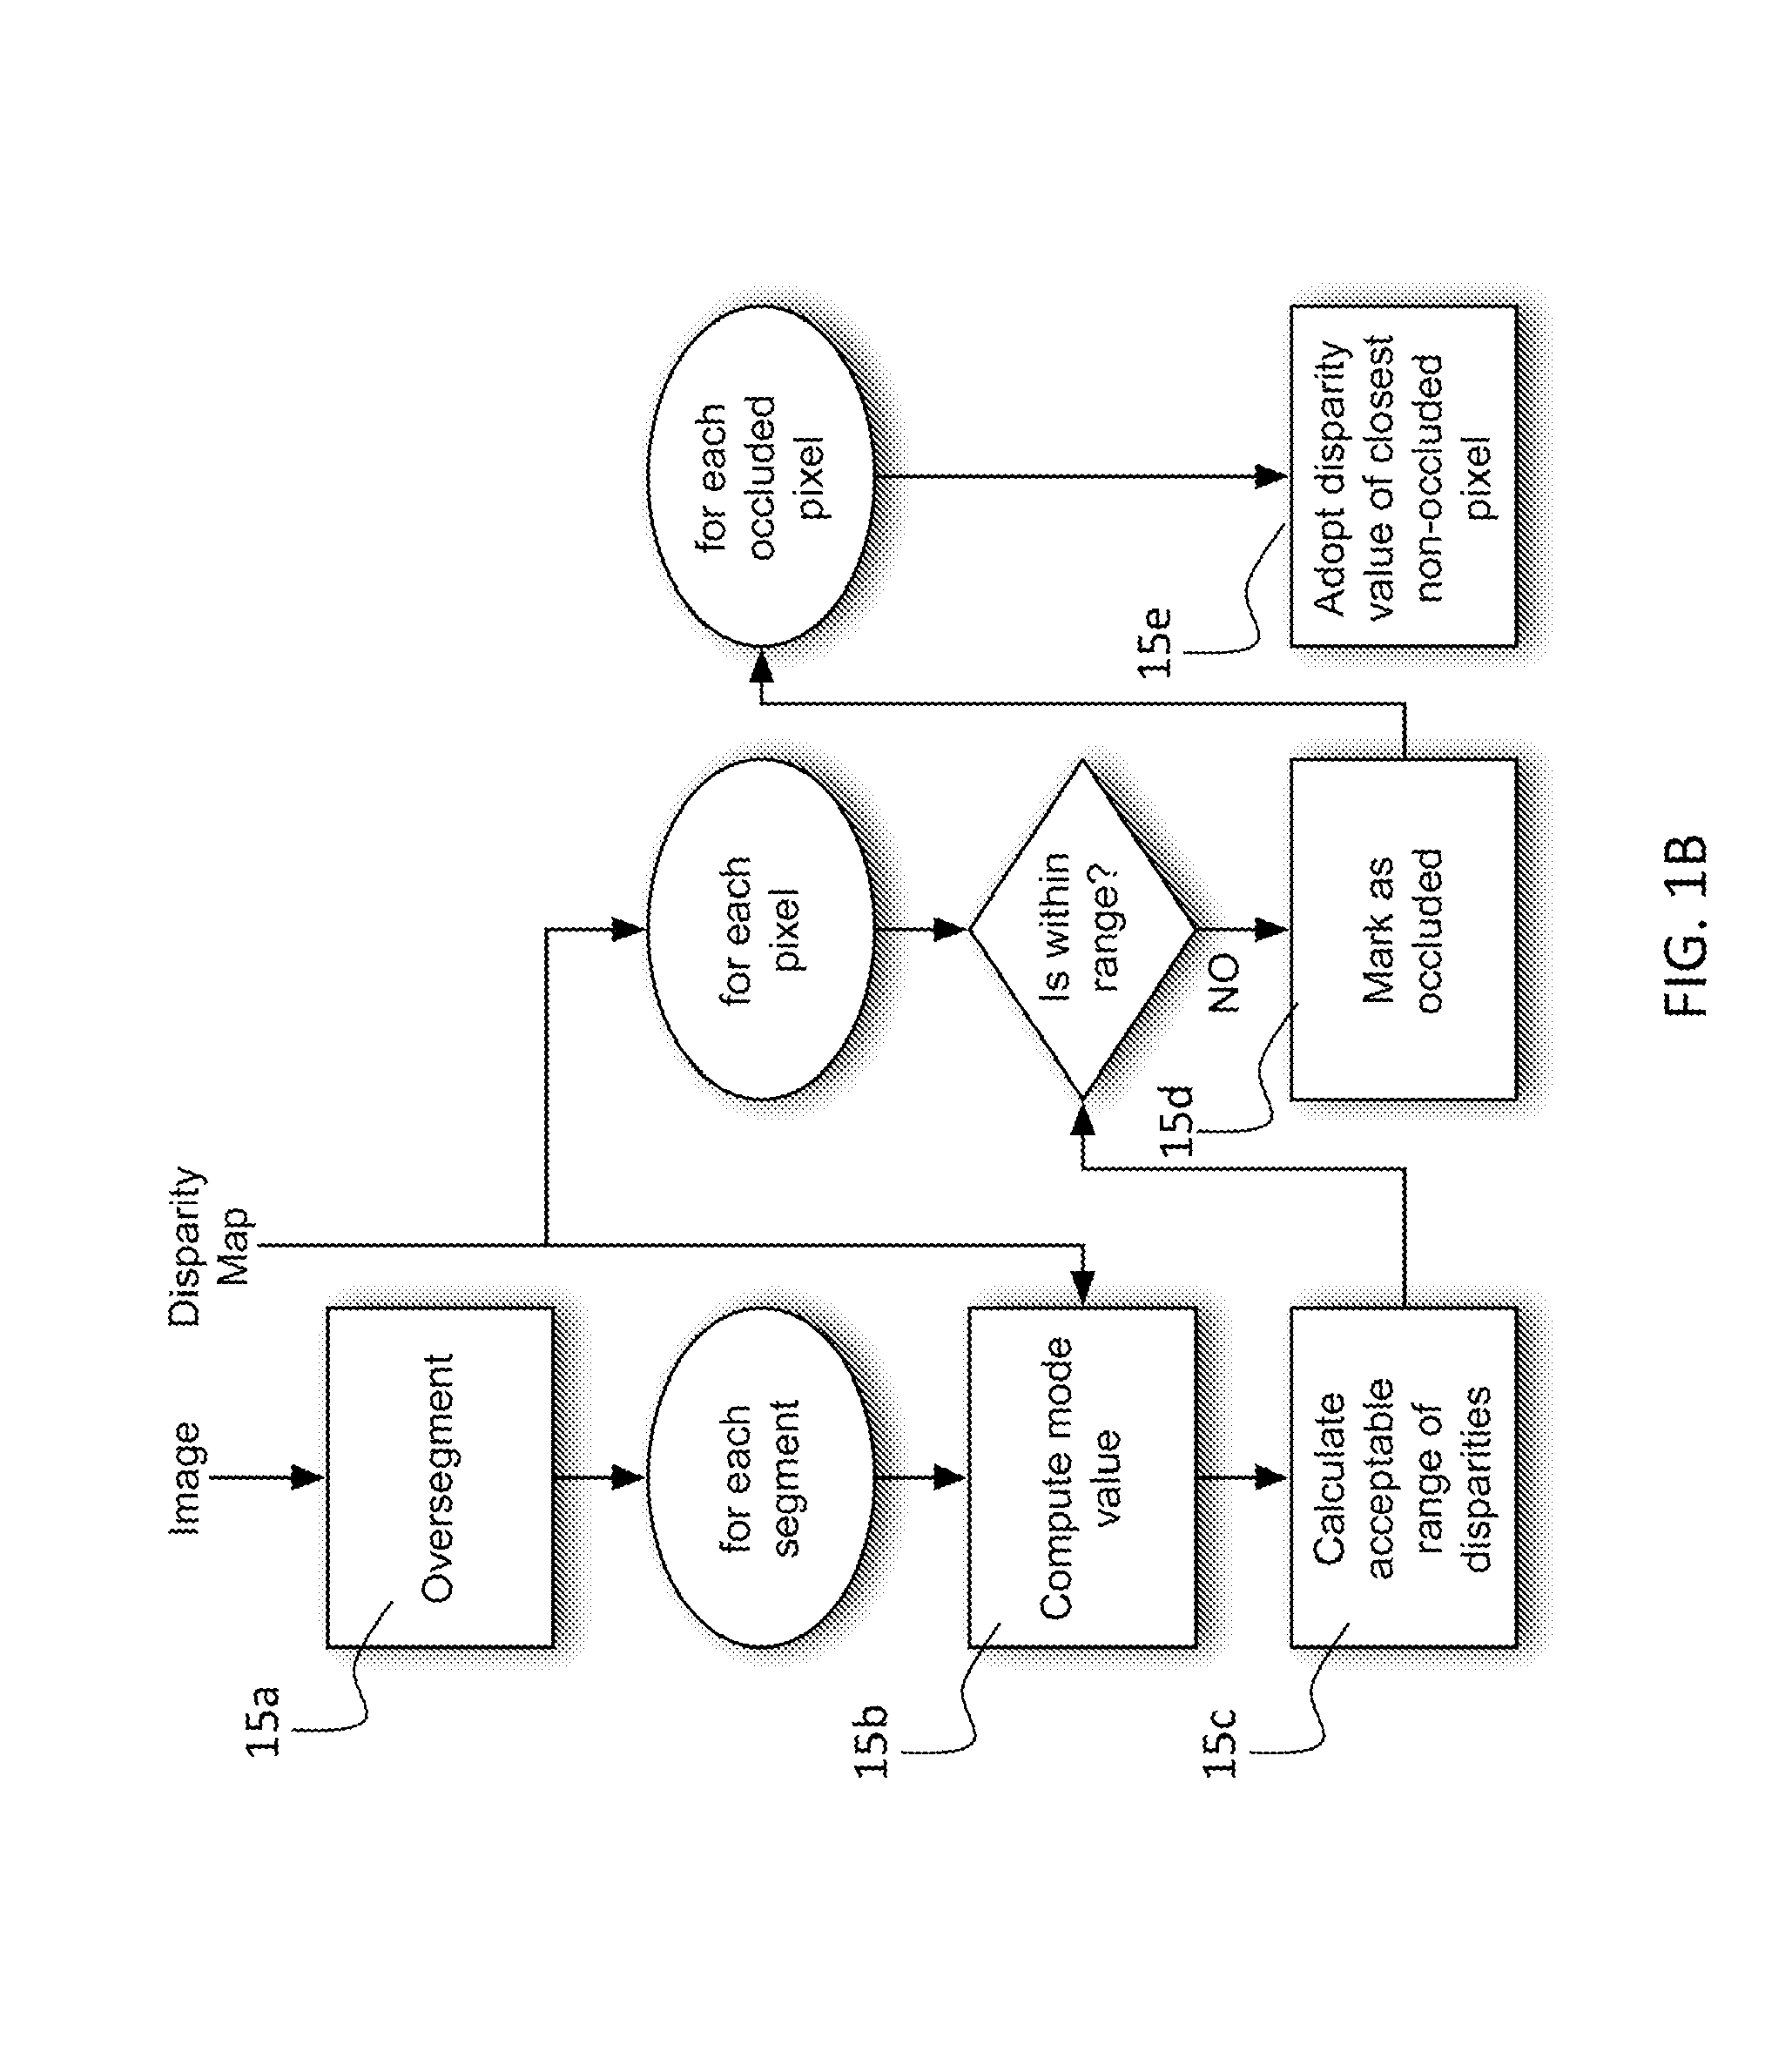 Multi view synthesis method and display devices with spatial and inter-view consistency